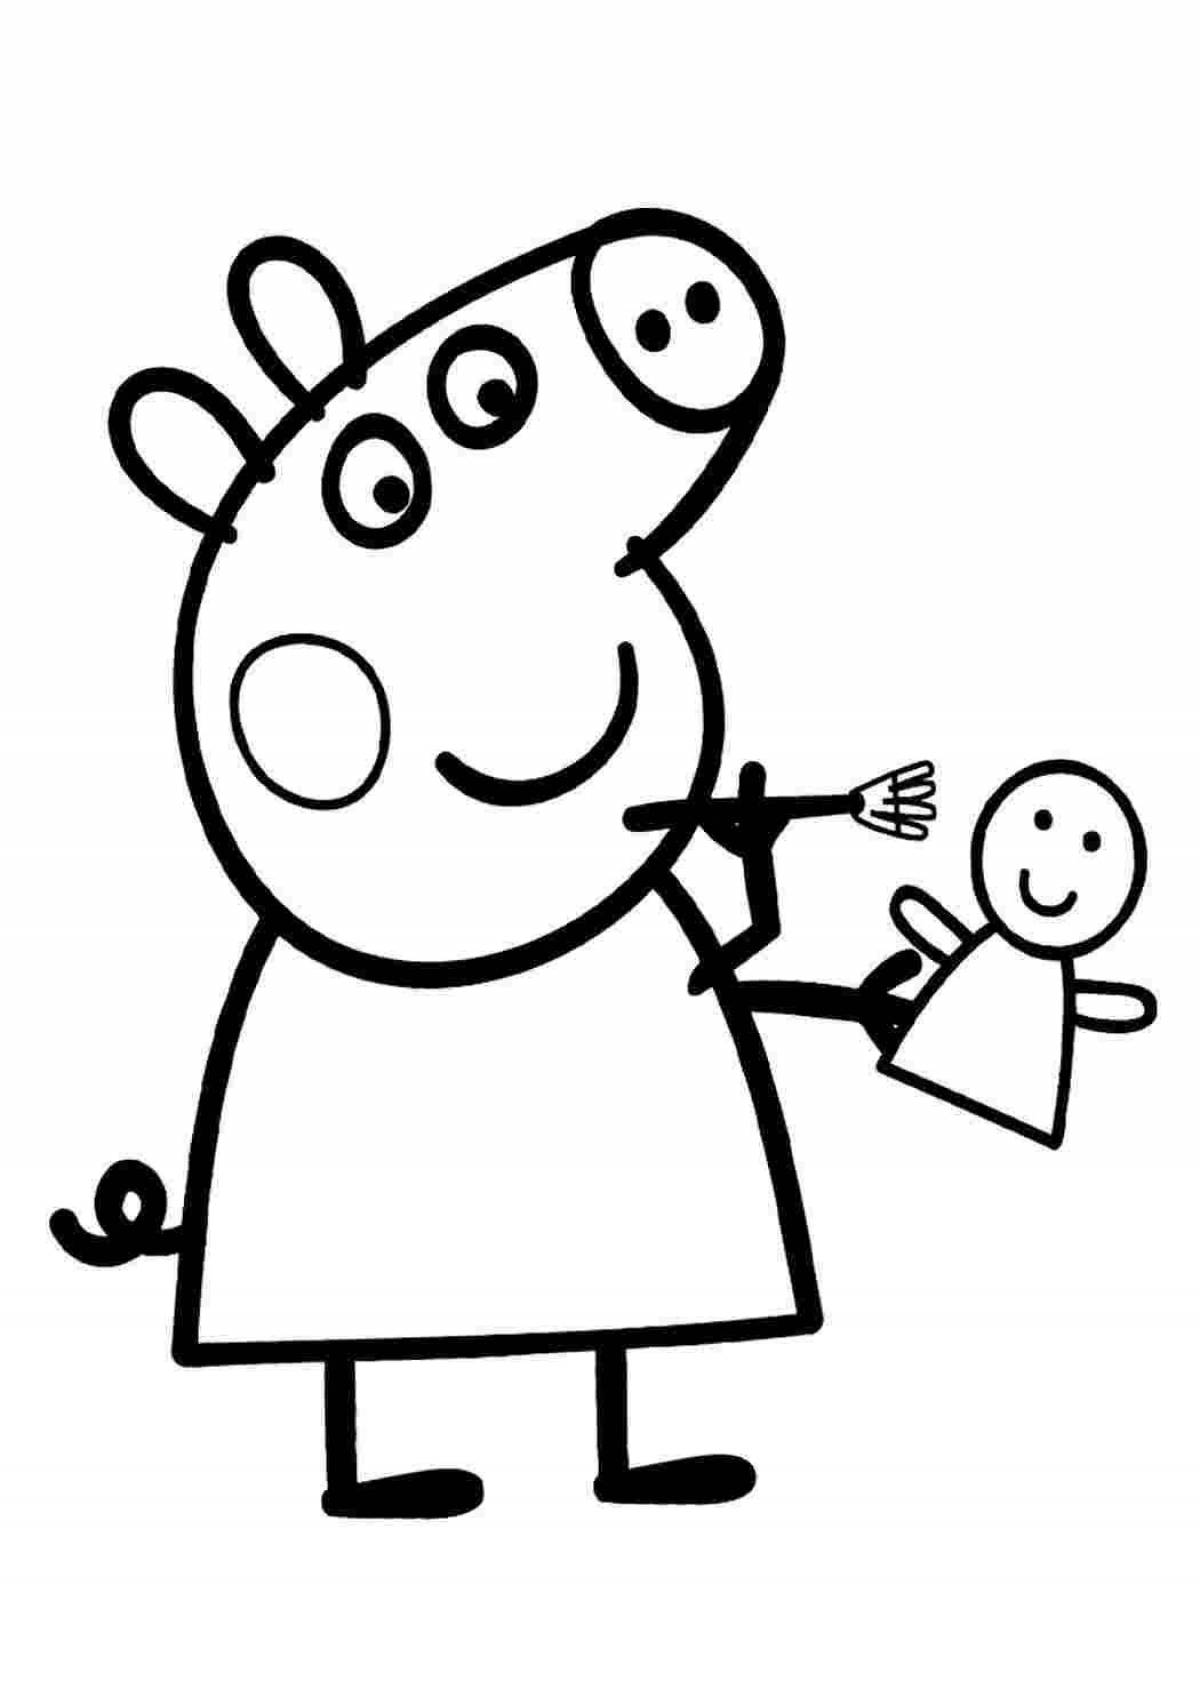 Colorful peppa pig frog coloring page